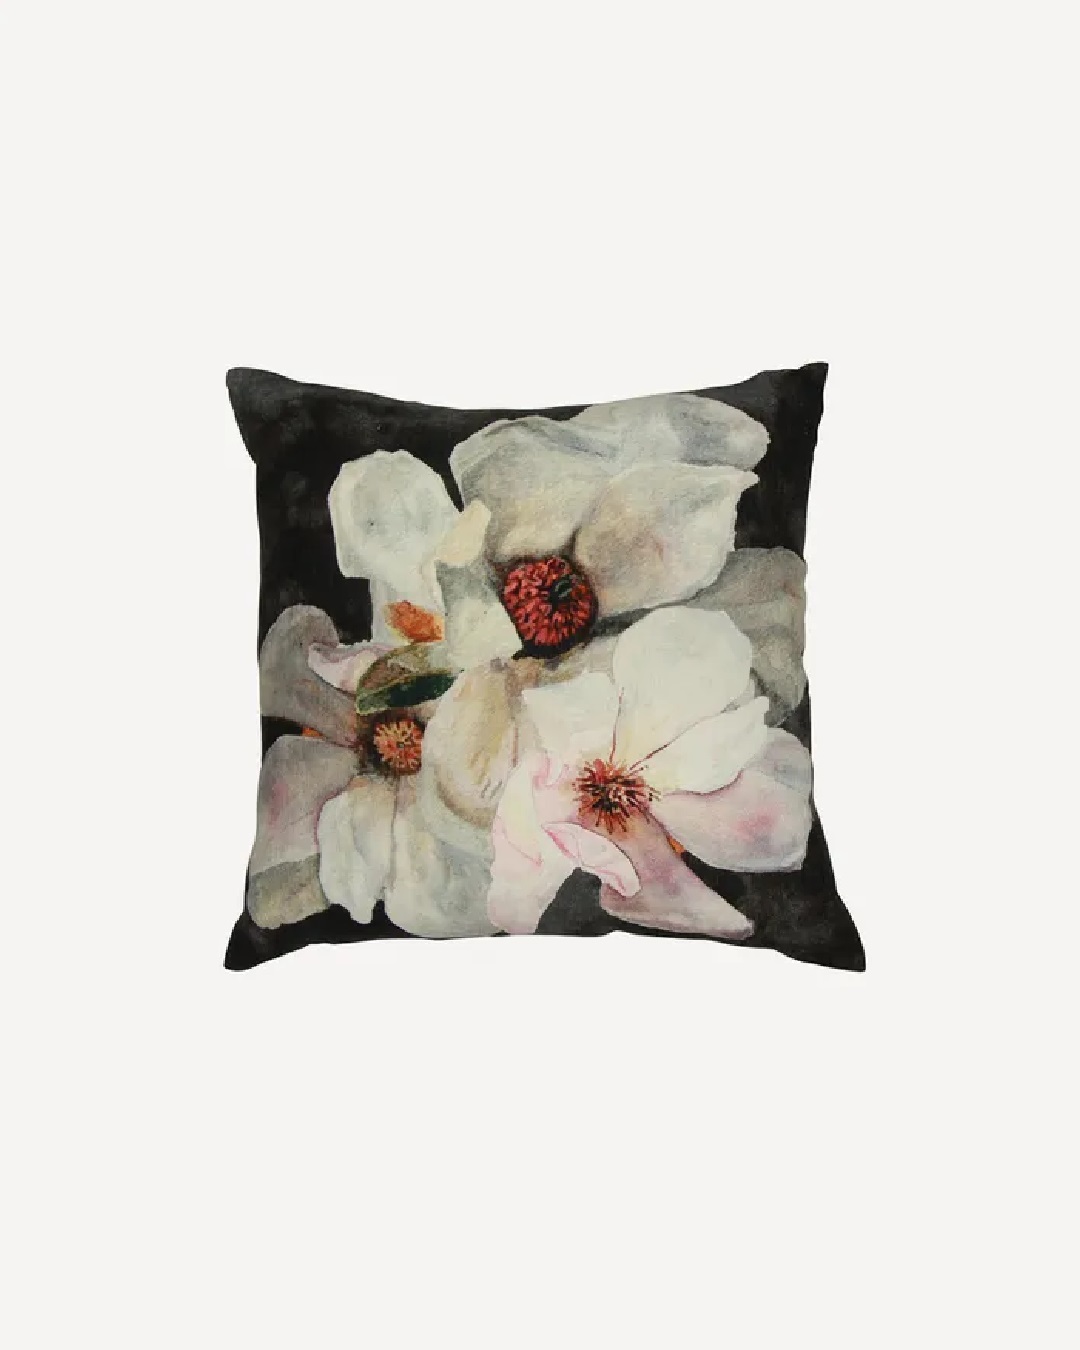 Charcoal cushion with magnolia flowers on it